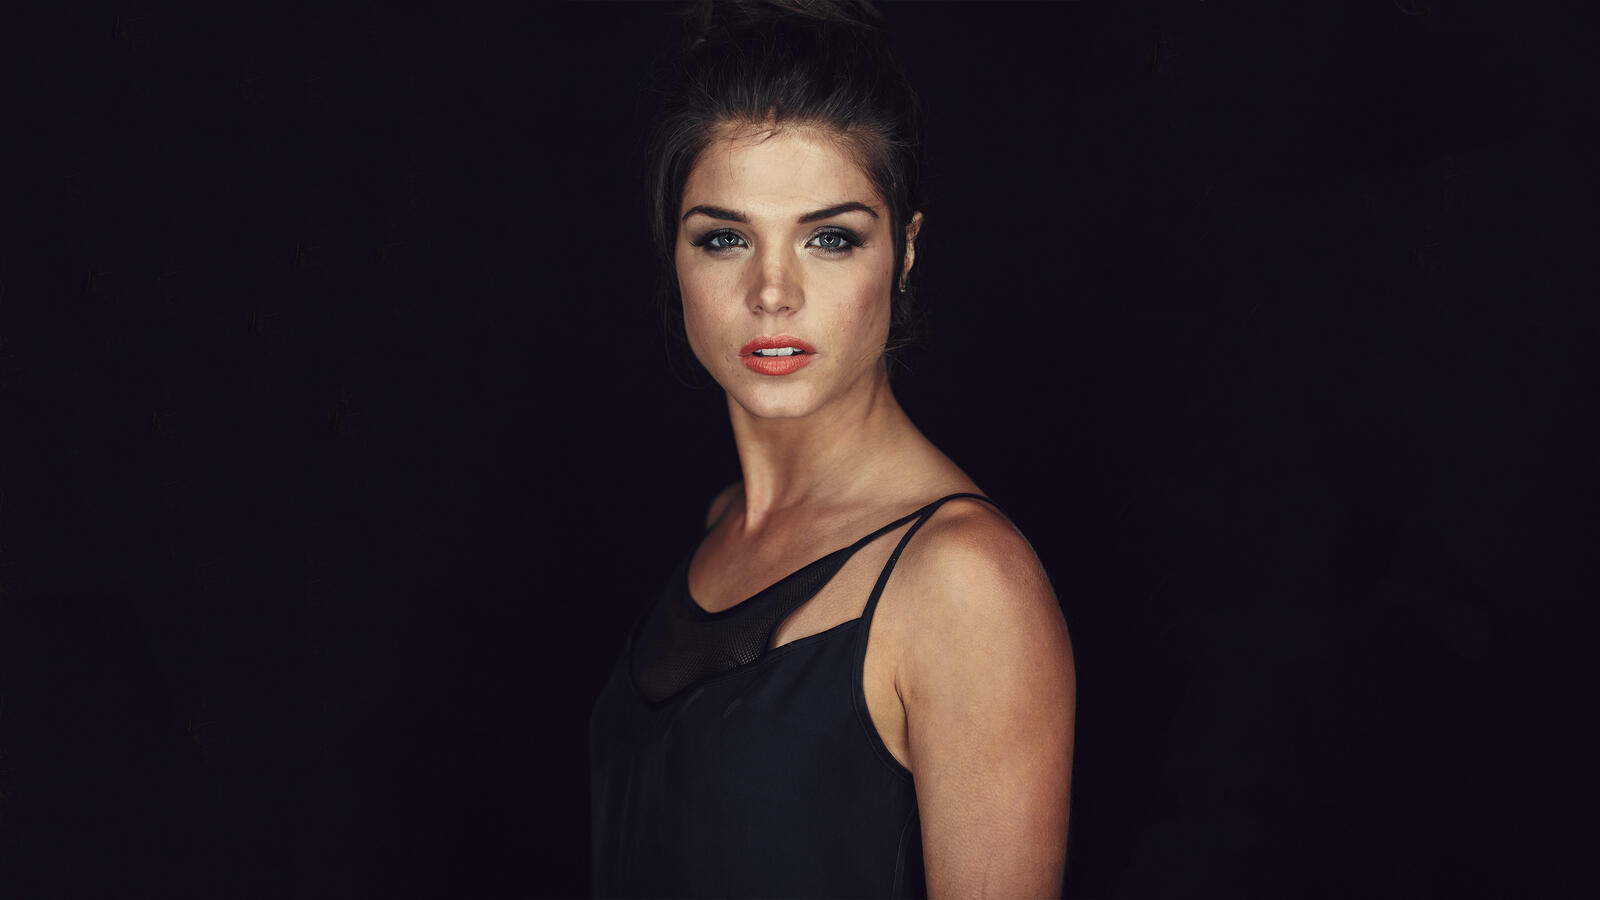 Wallpapers Marie Avgeropoulos girls black background on the desktop